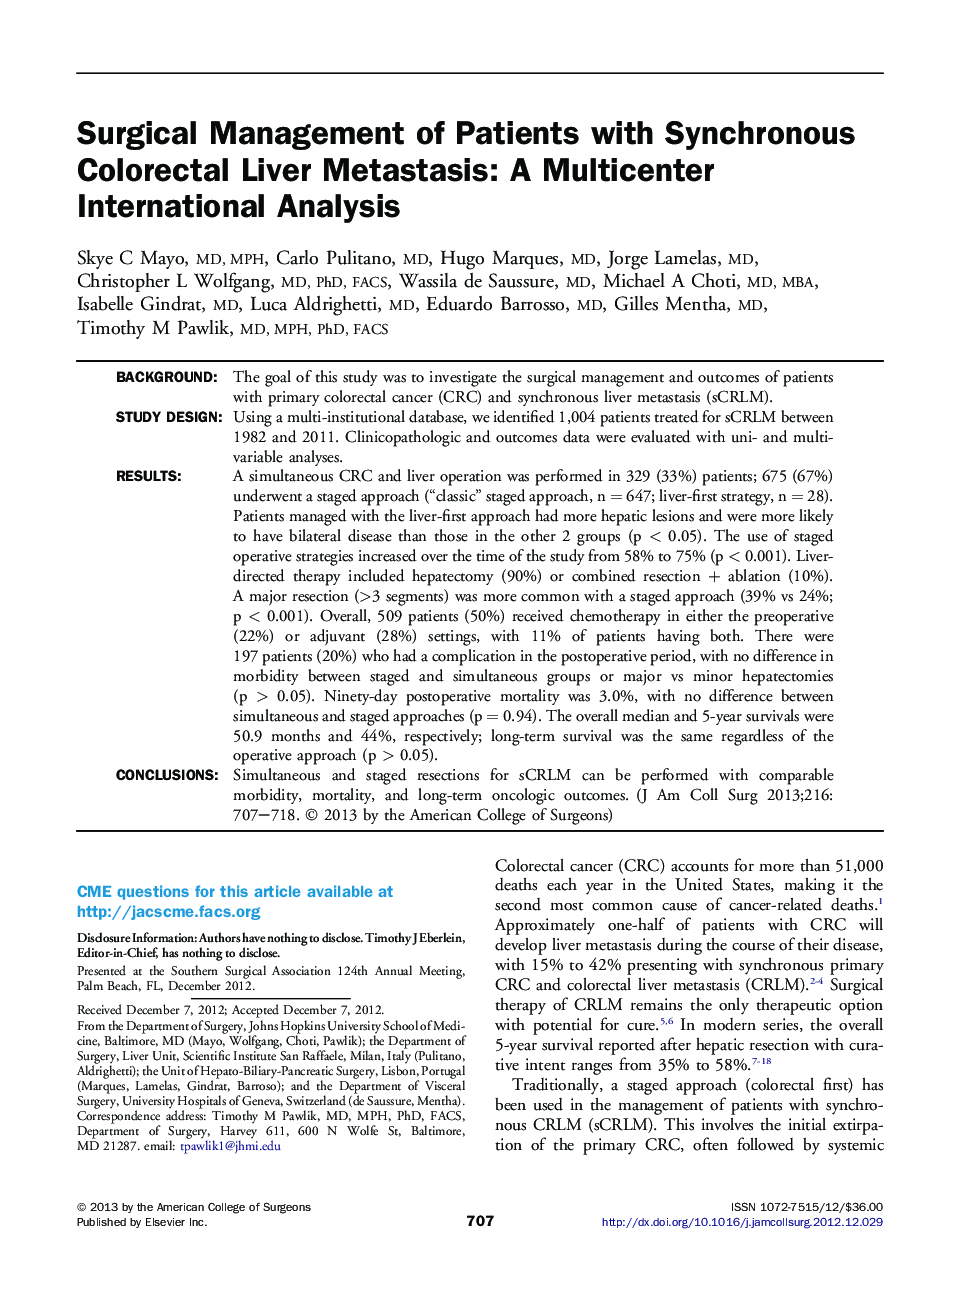 Surgical Management of Patients with Synchronous Colorectal Liver Metastasis: A Multicenter International Analysis 